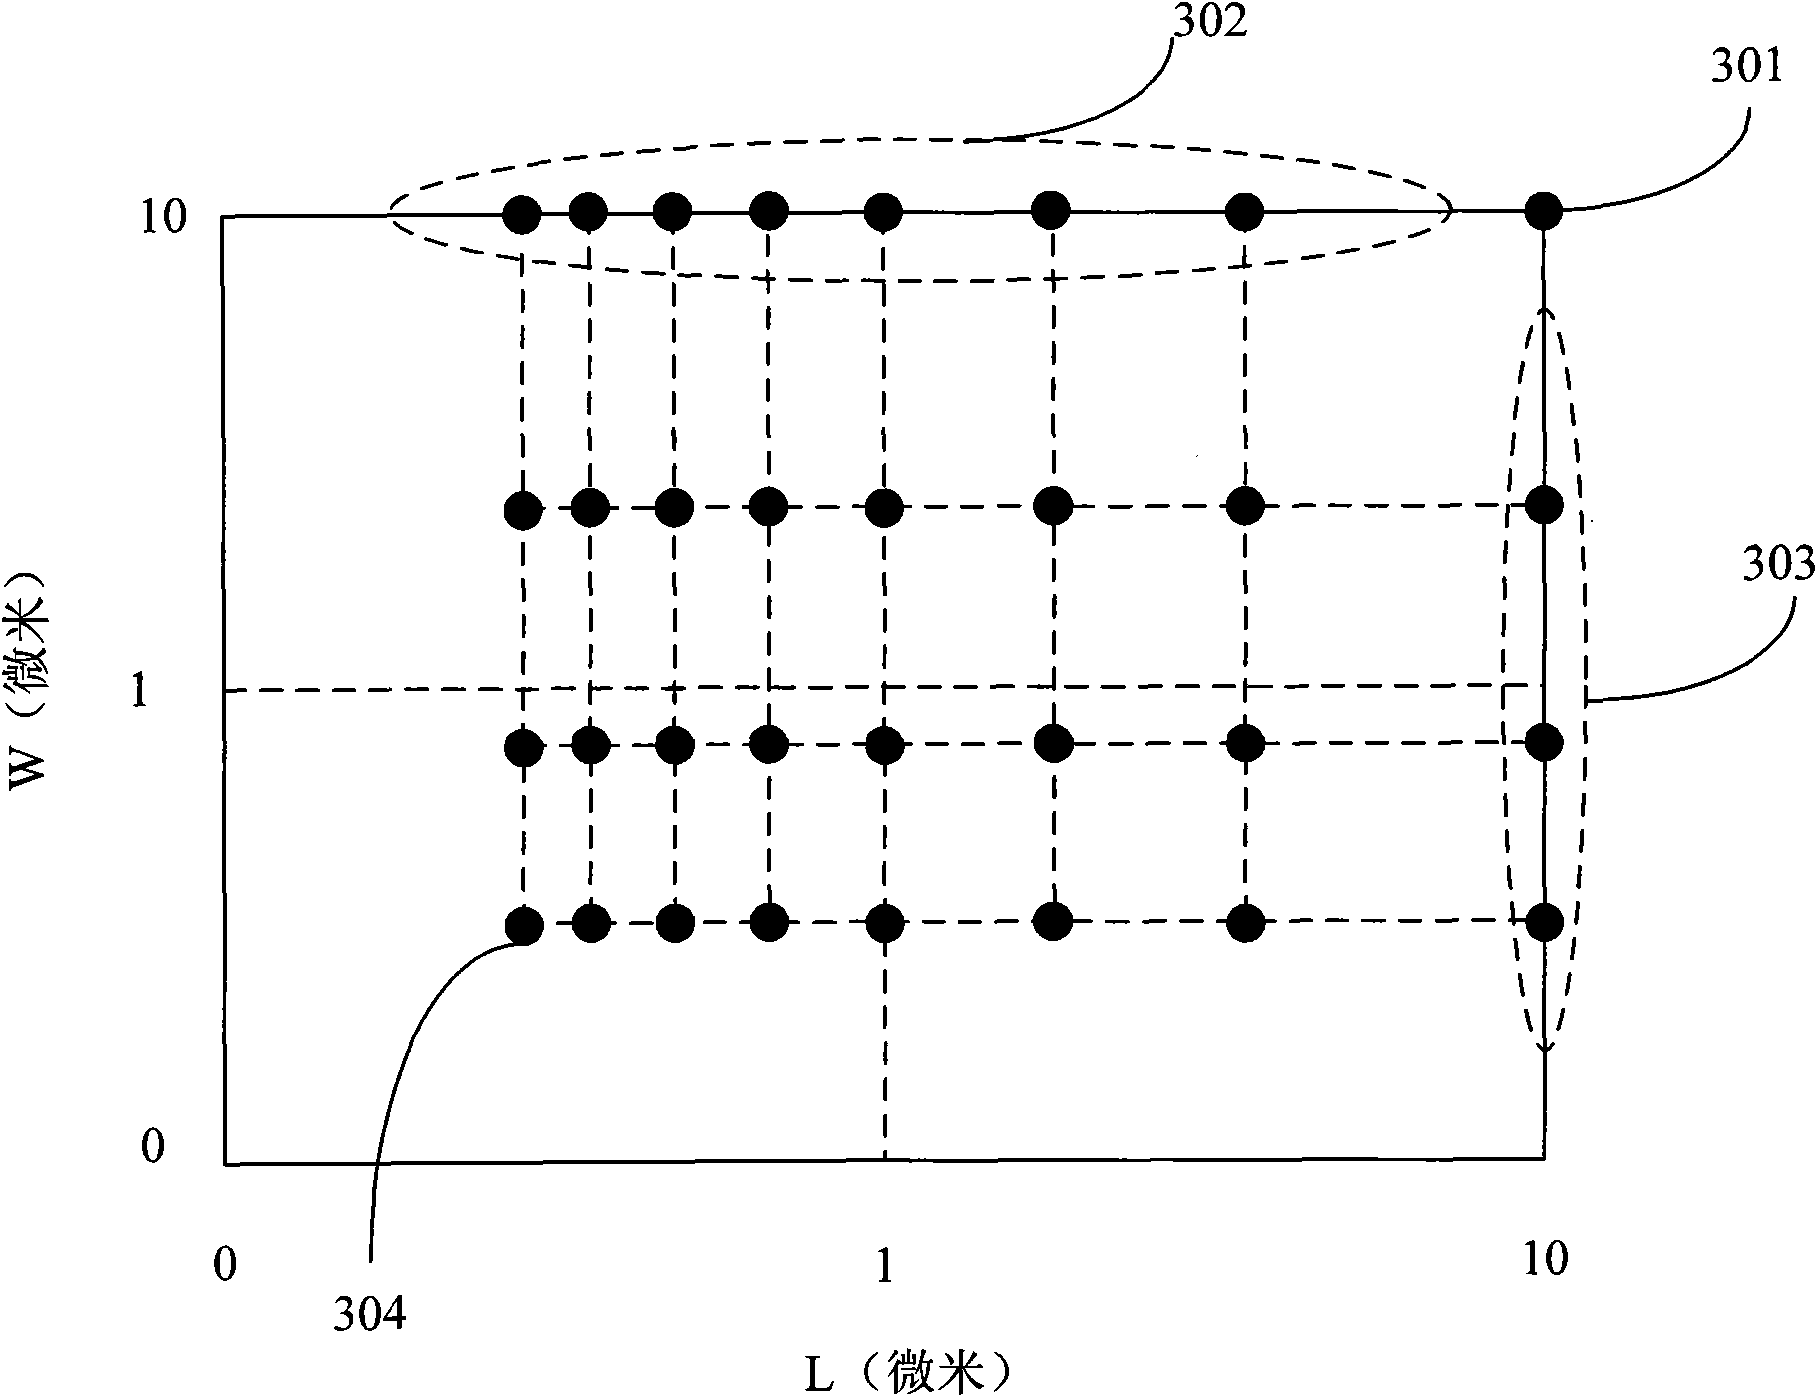 Method for building MOSFET (Metal-Oxide-Semiconductor Field Effect Transistor) model